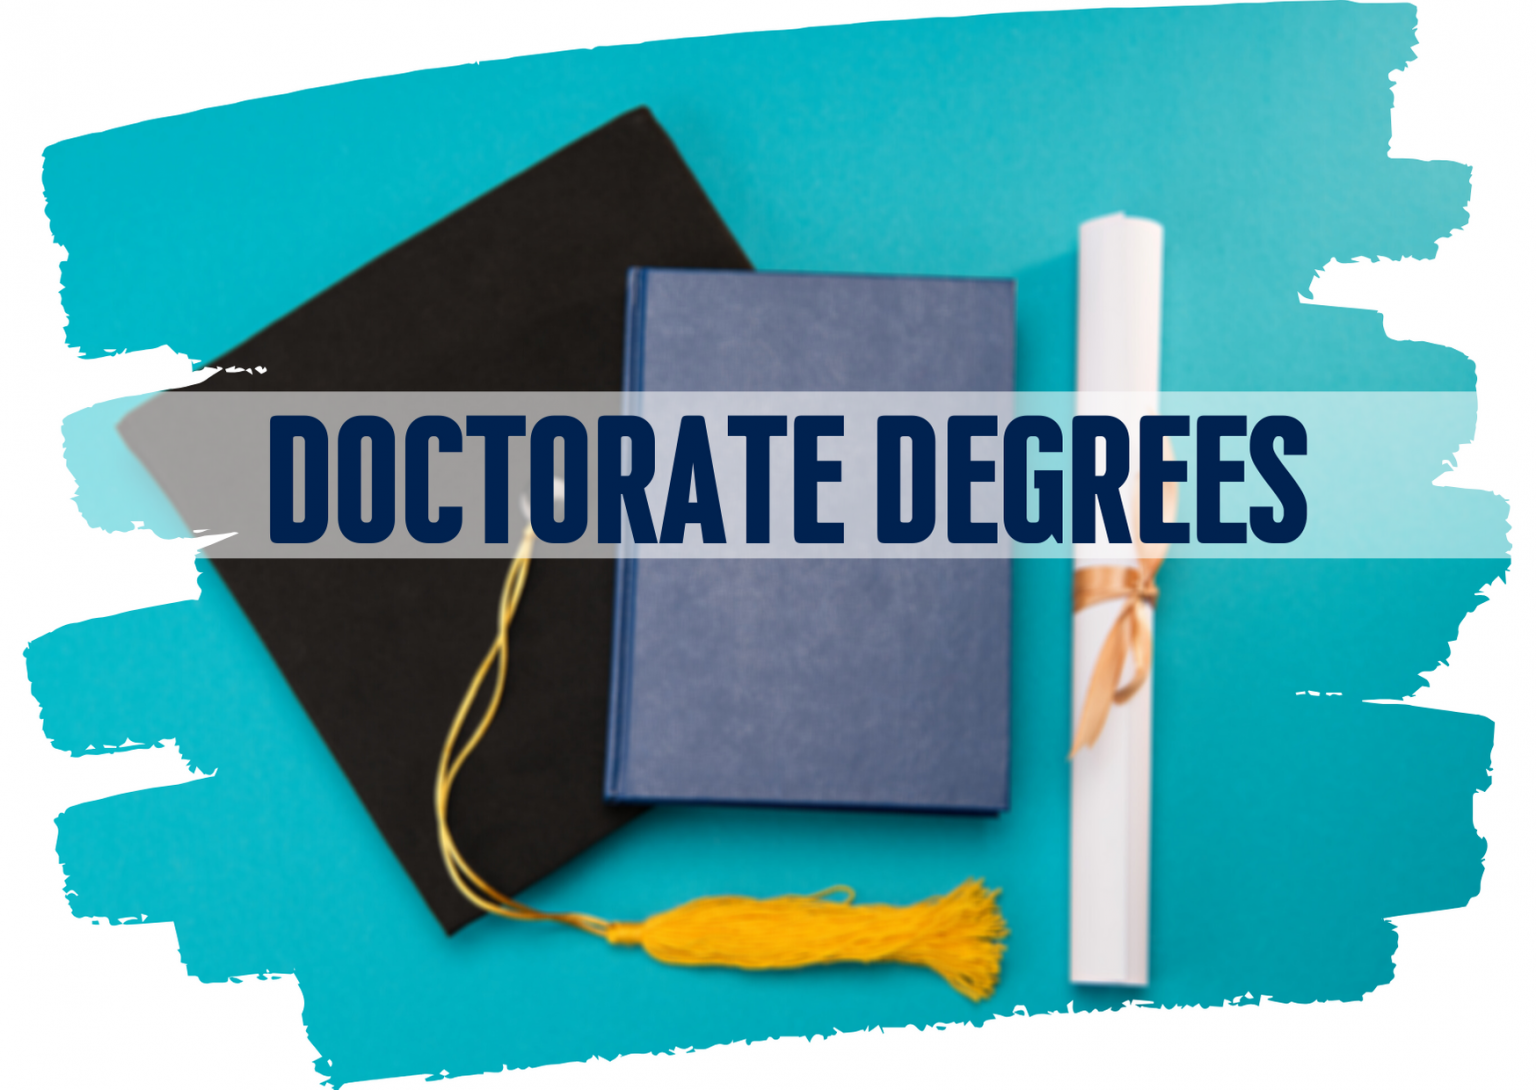 Degree meaning. Doctorate degree. Doctoral degree - PHD. Doctor's degree.